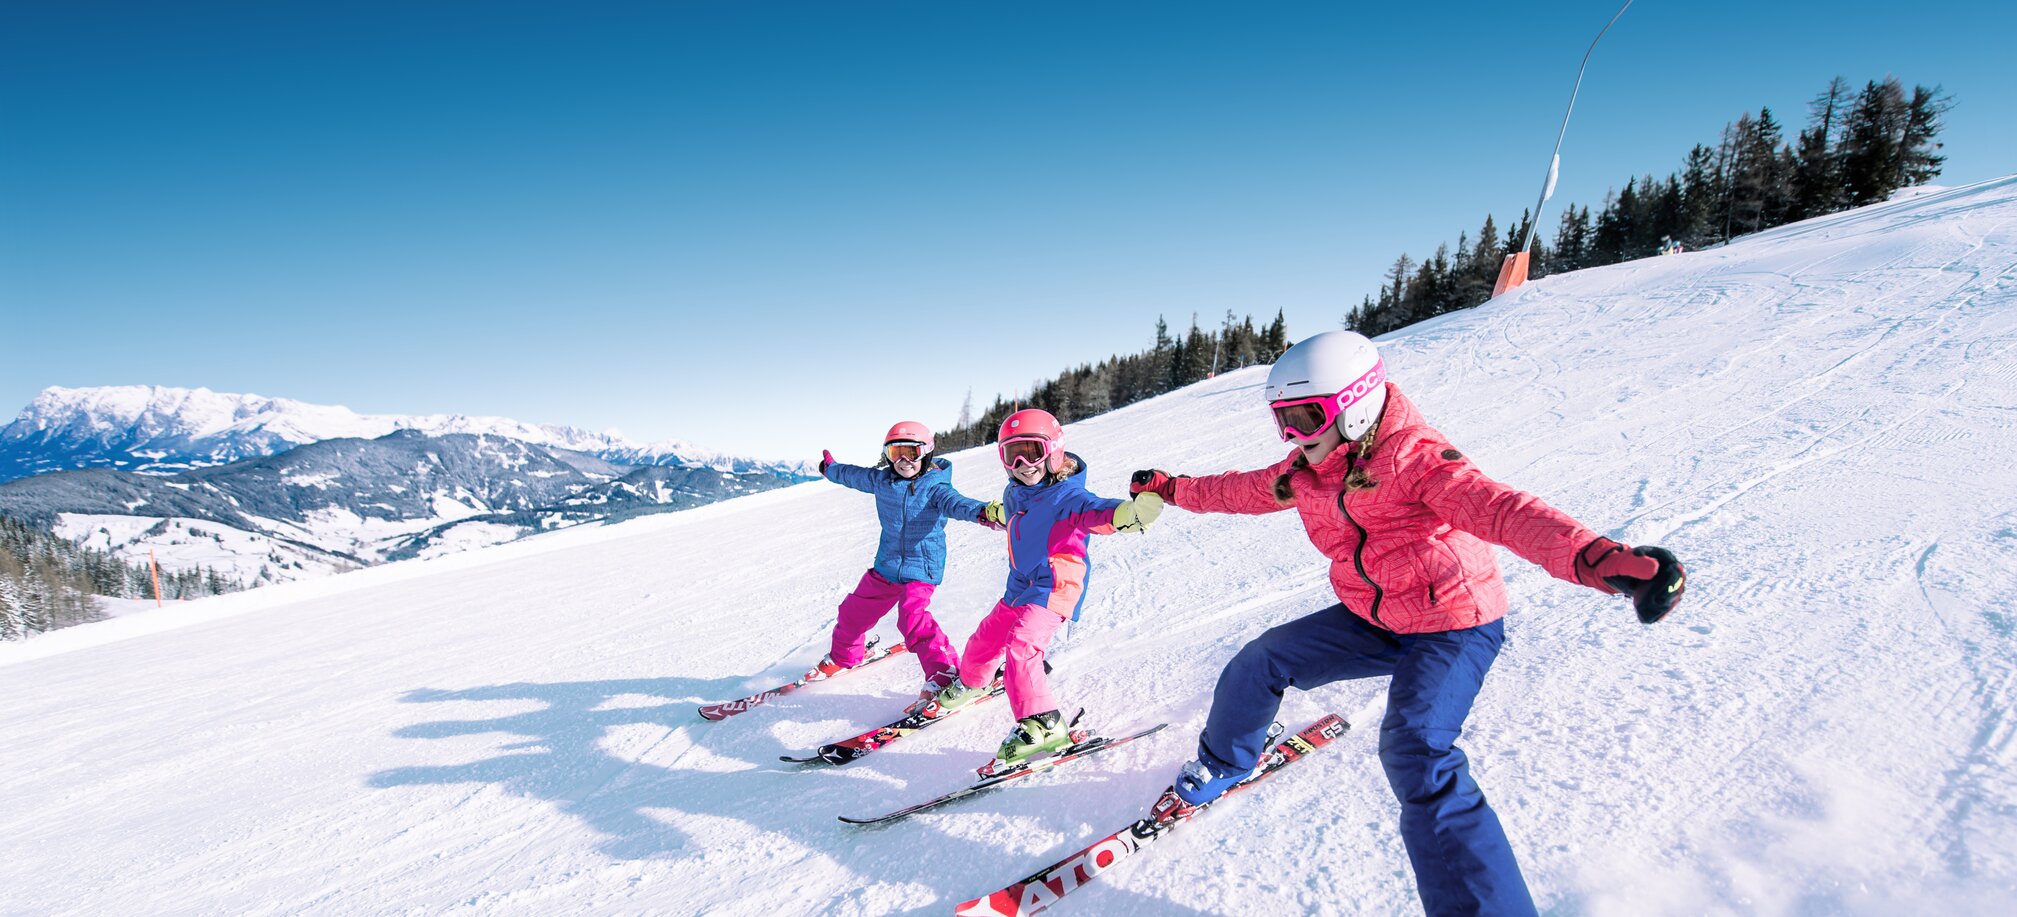 Three children hold hands and ski down the piste side by side, their ski tips touching and they laugh as they do so